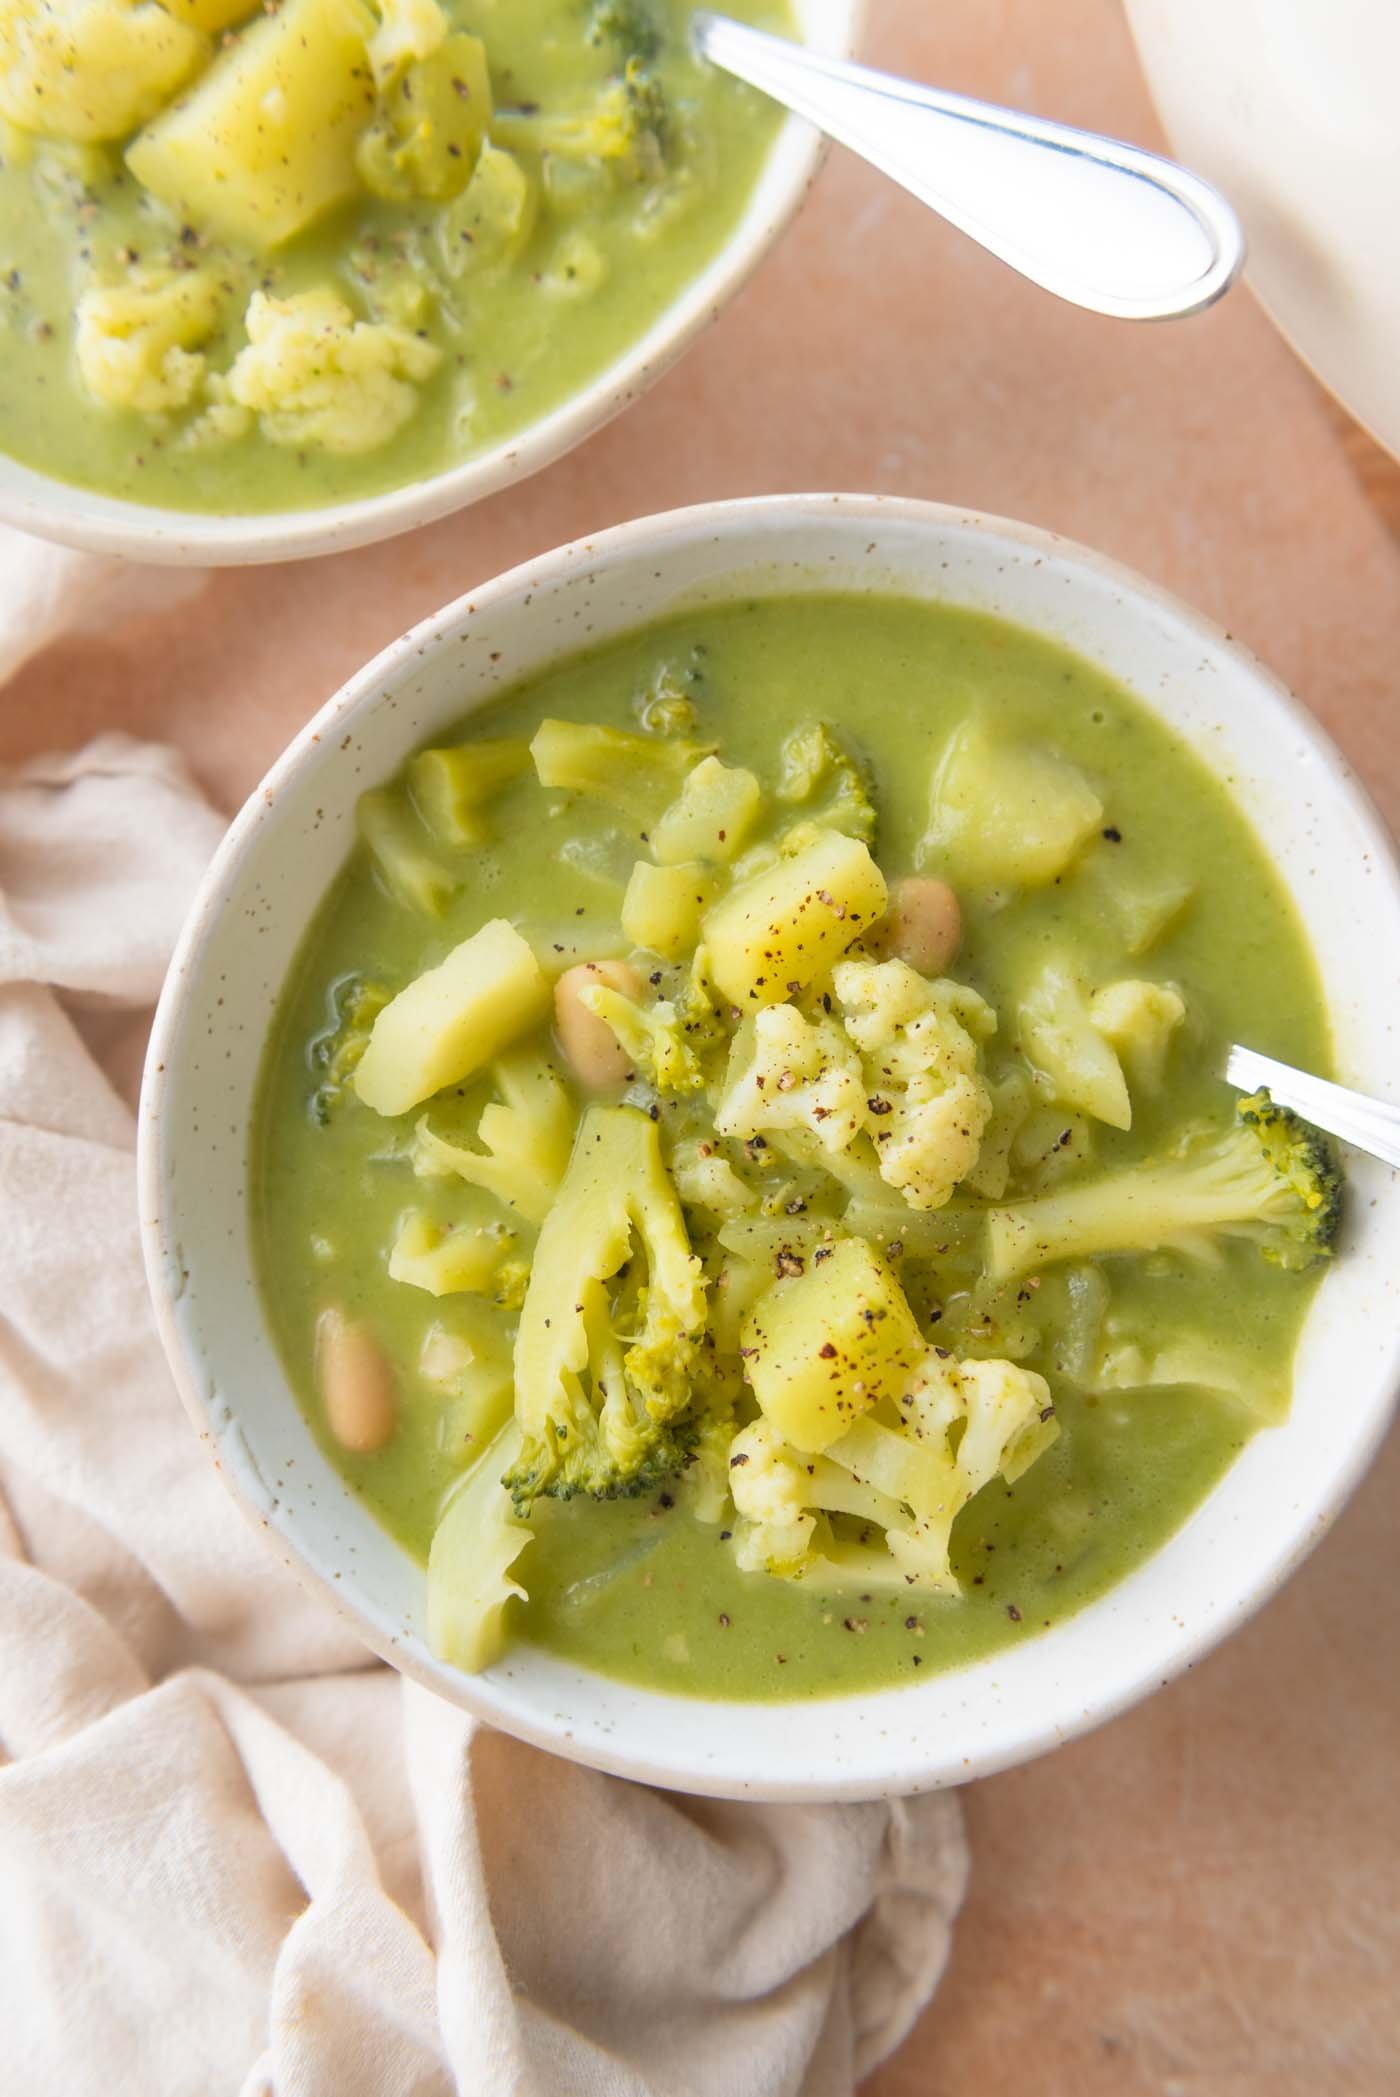 Bowl of soup with broccoli, cauliflower, white beans and potato.